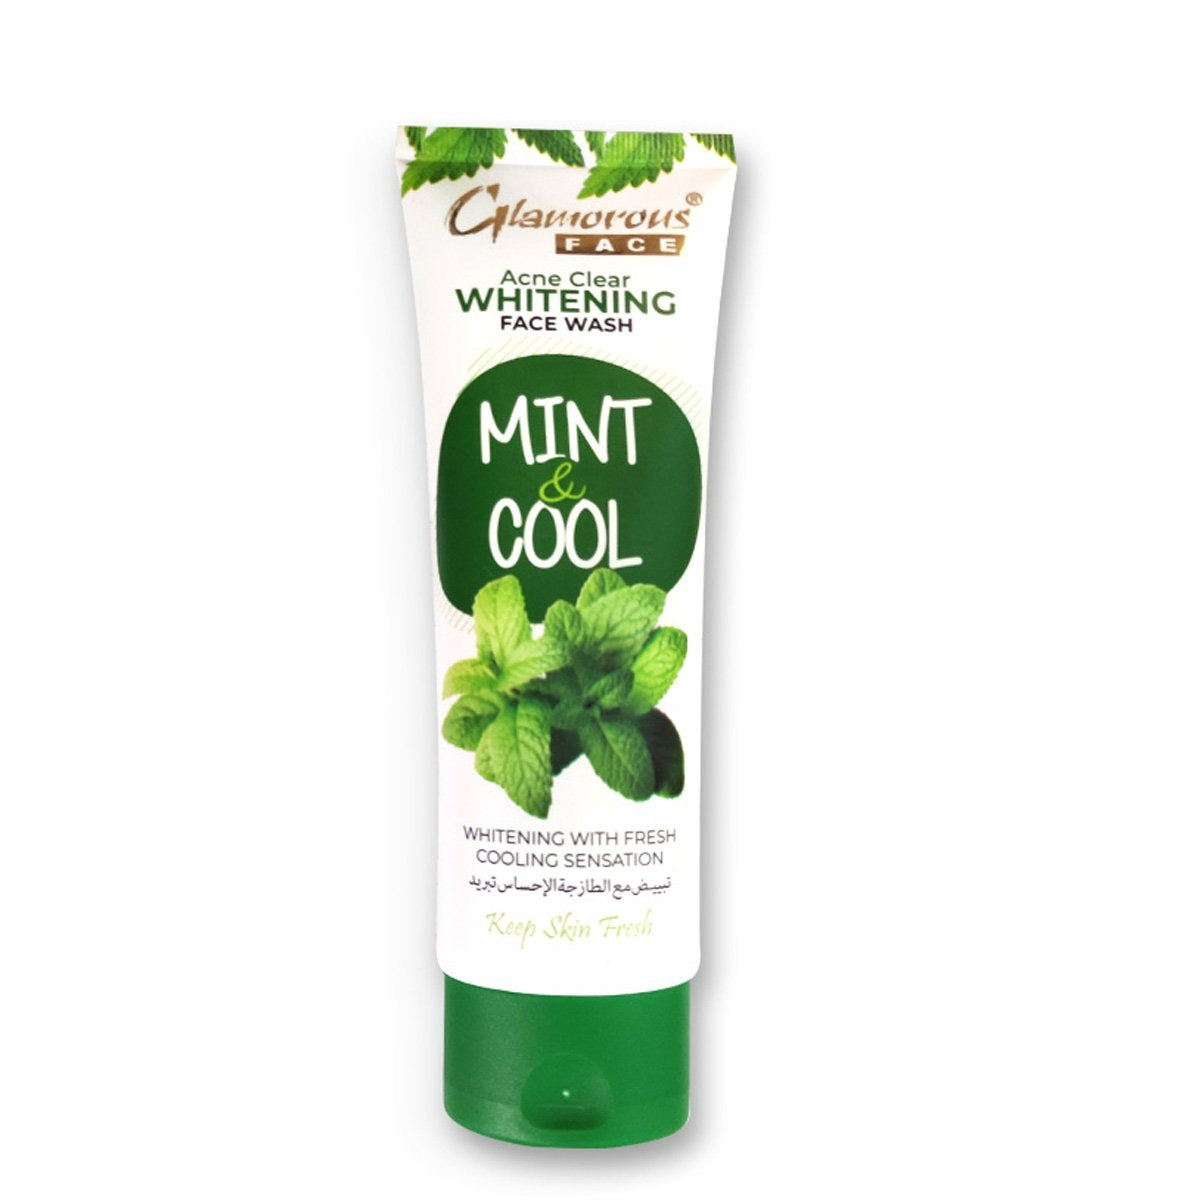 Glamorous Face Whitening Face Wash Mint & Cool Acne Clear Whitening 100g freeshipping - lasertag.pk